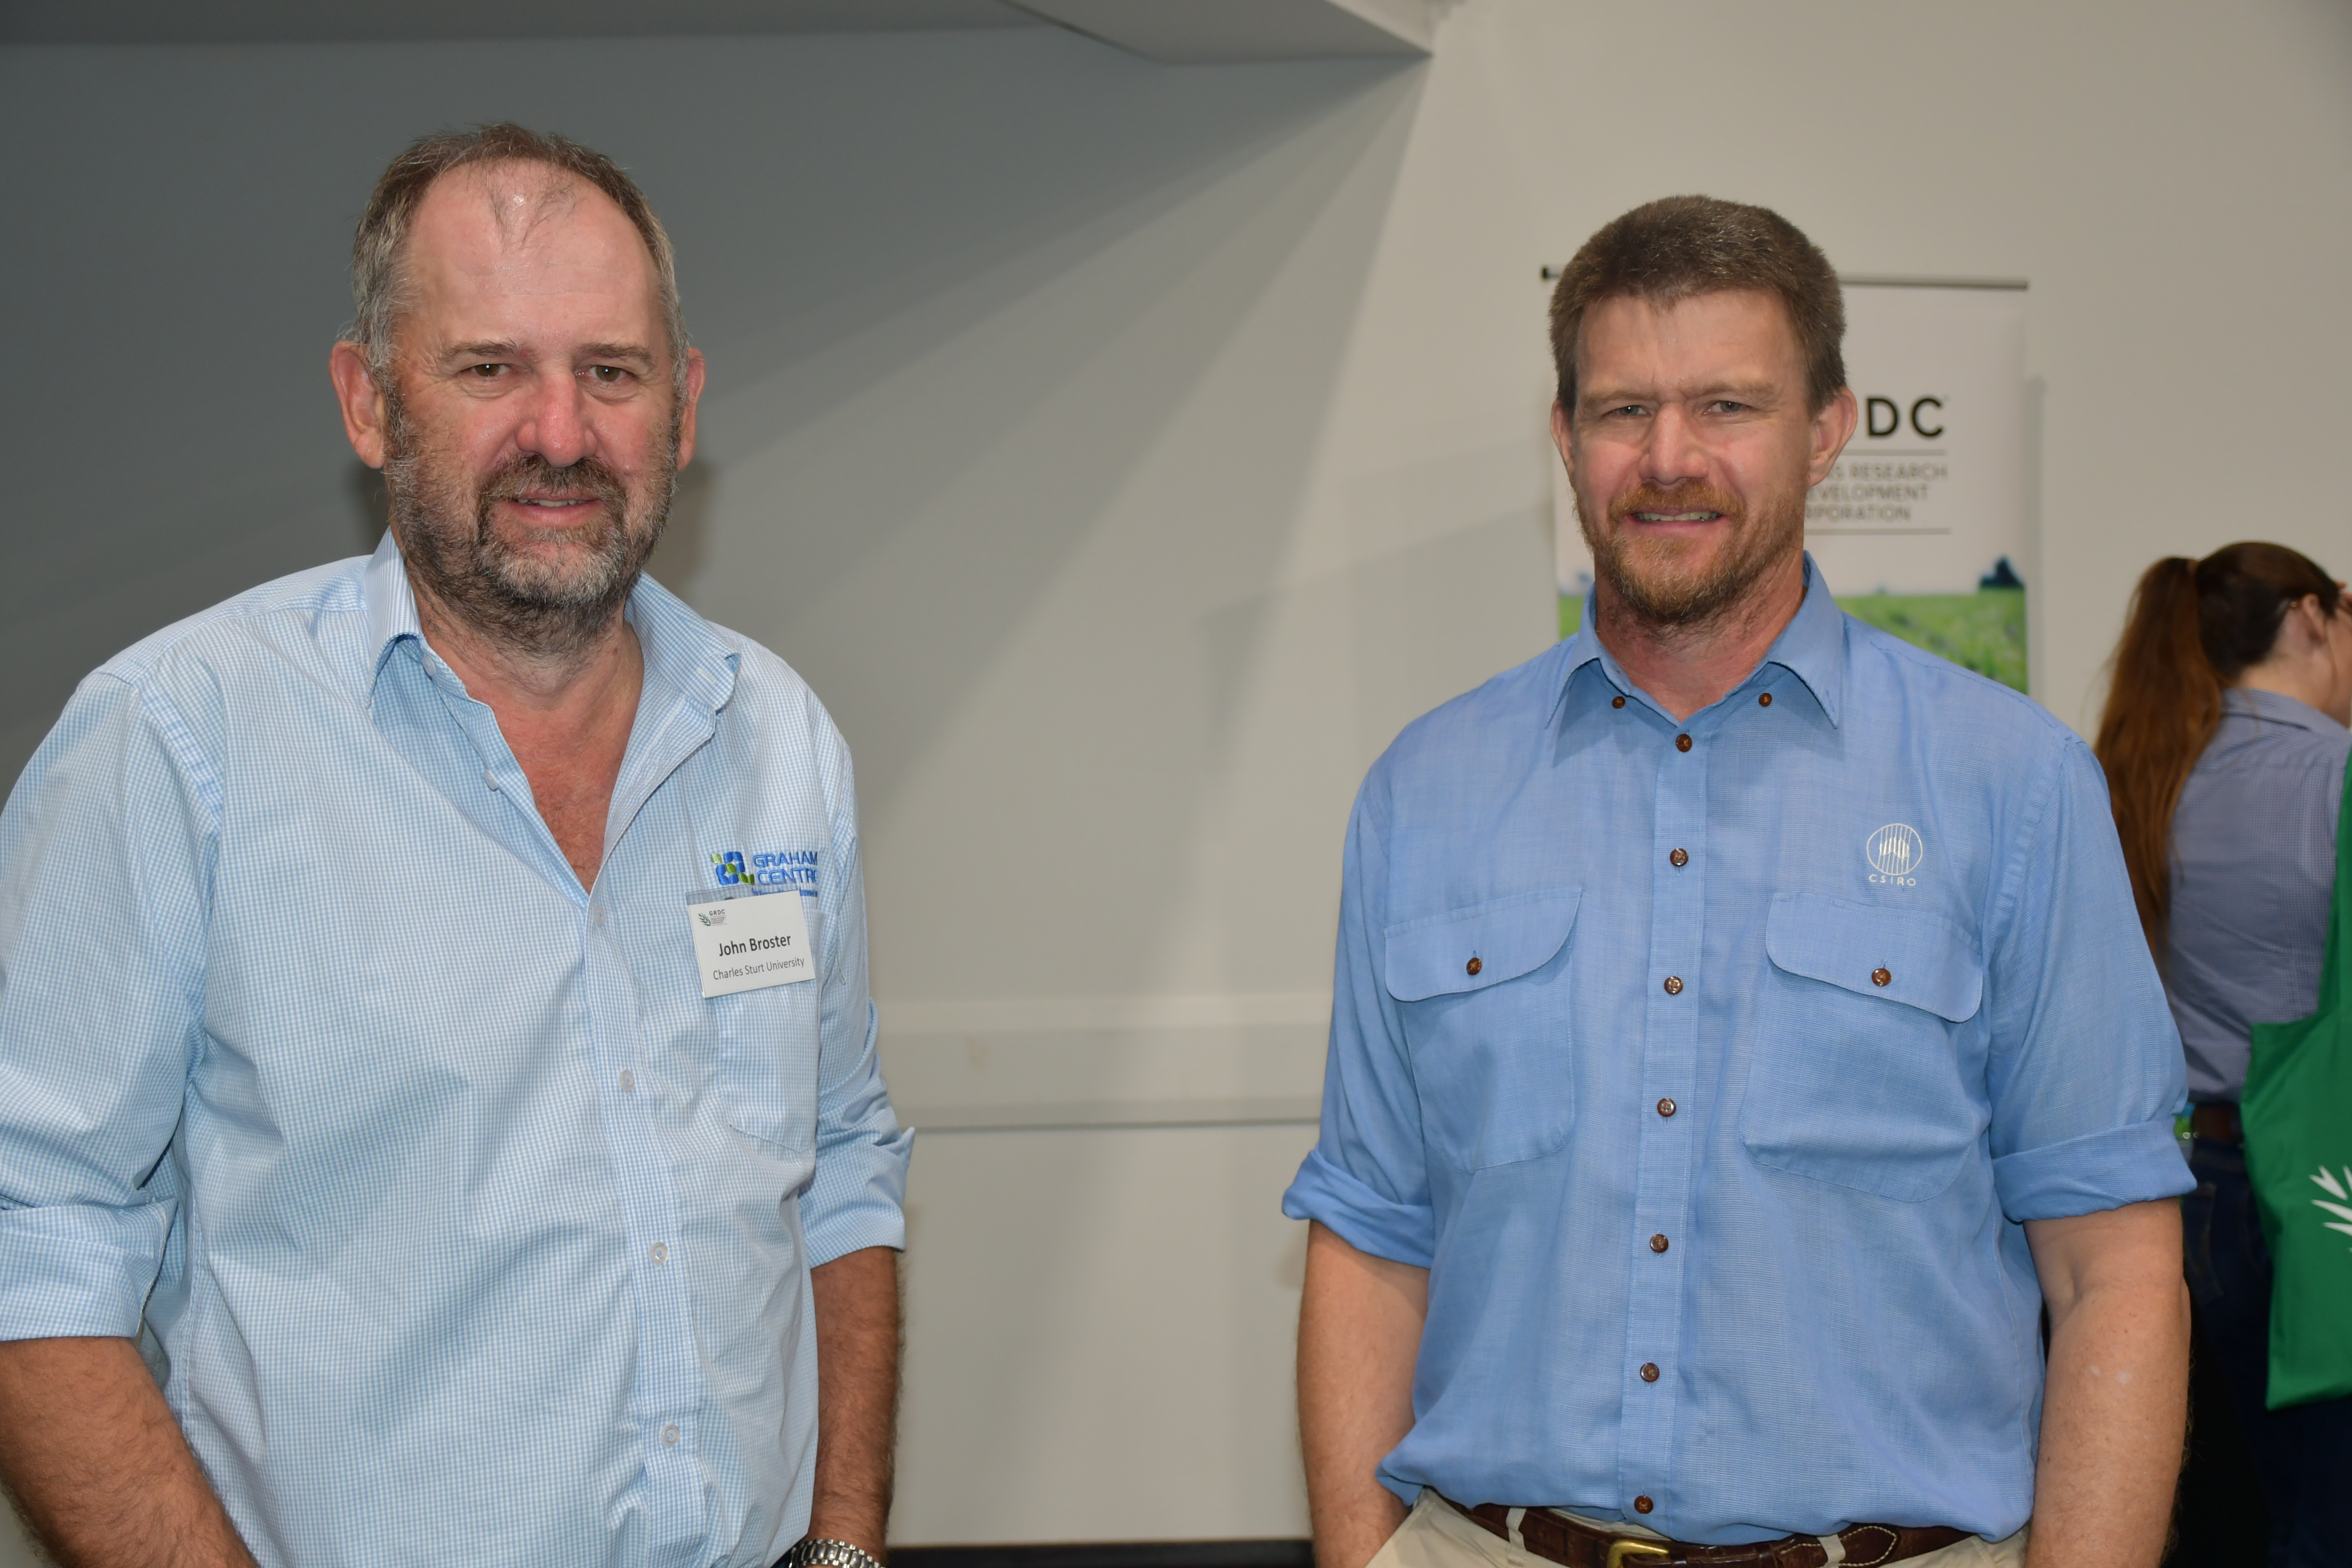 Charles Sturt University researcher John Broster and CSIRO scientist Allan Peake compare notes at the northern NSW event.